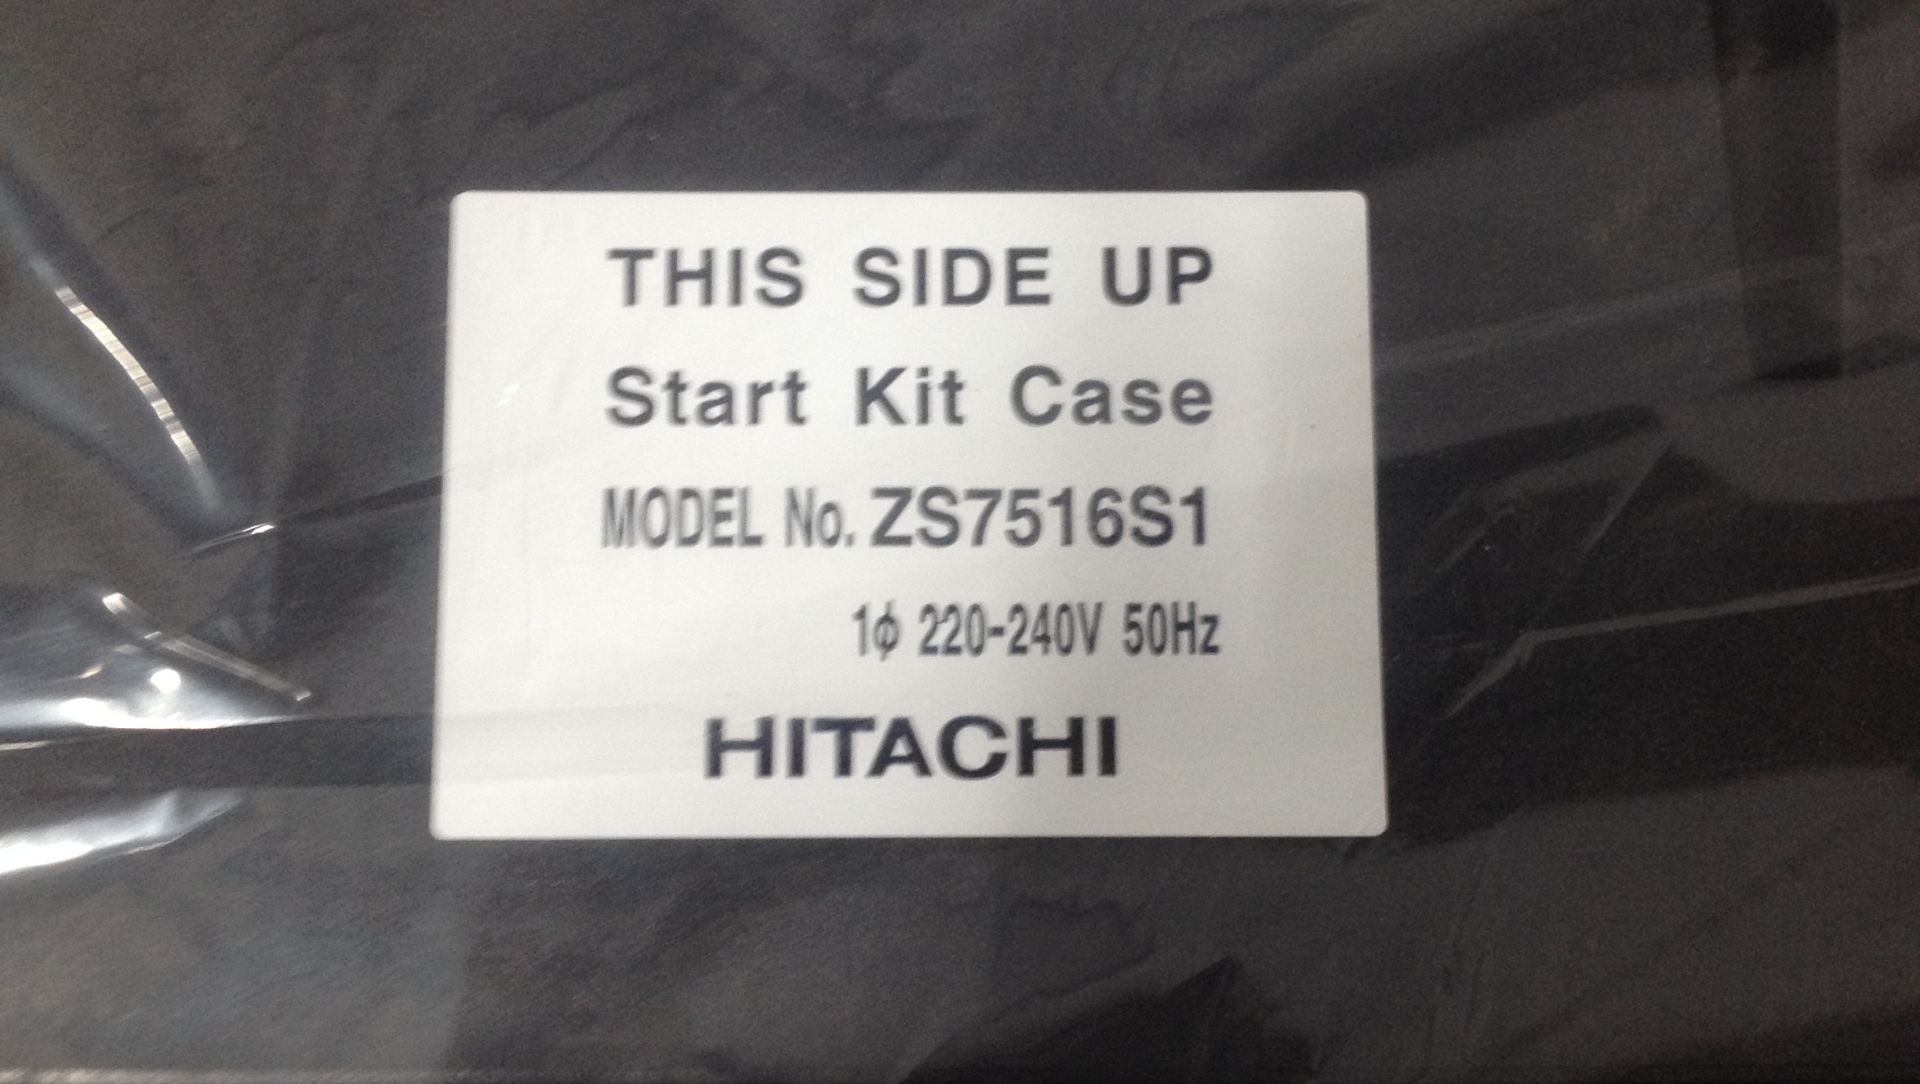 3 x Hitachi Accessories for Compressor; Start Kit Cases - Image 4 of 5